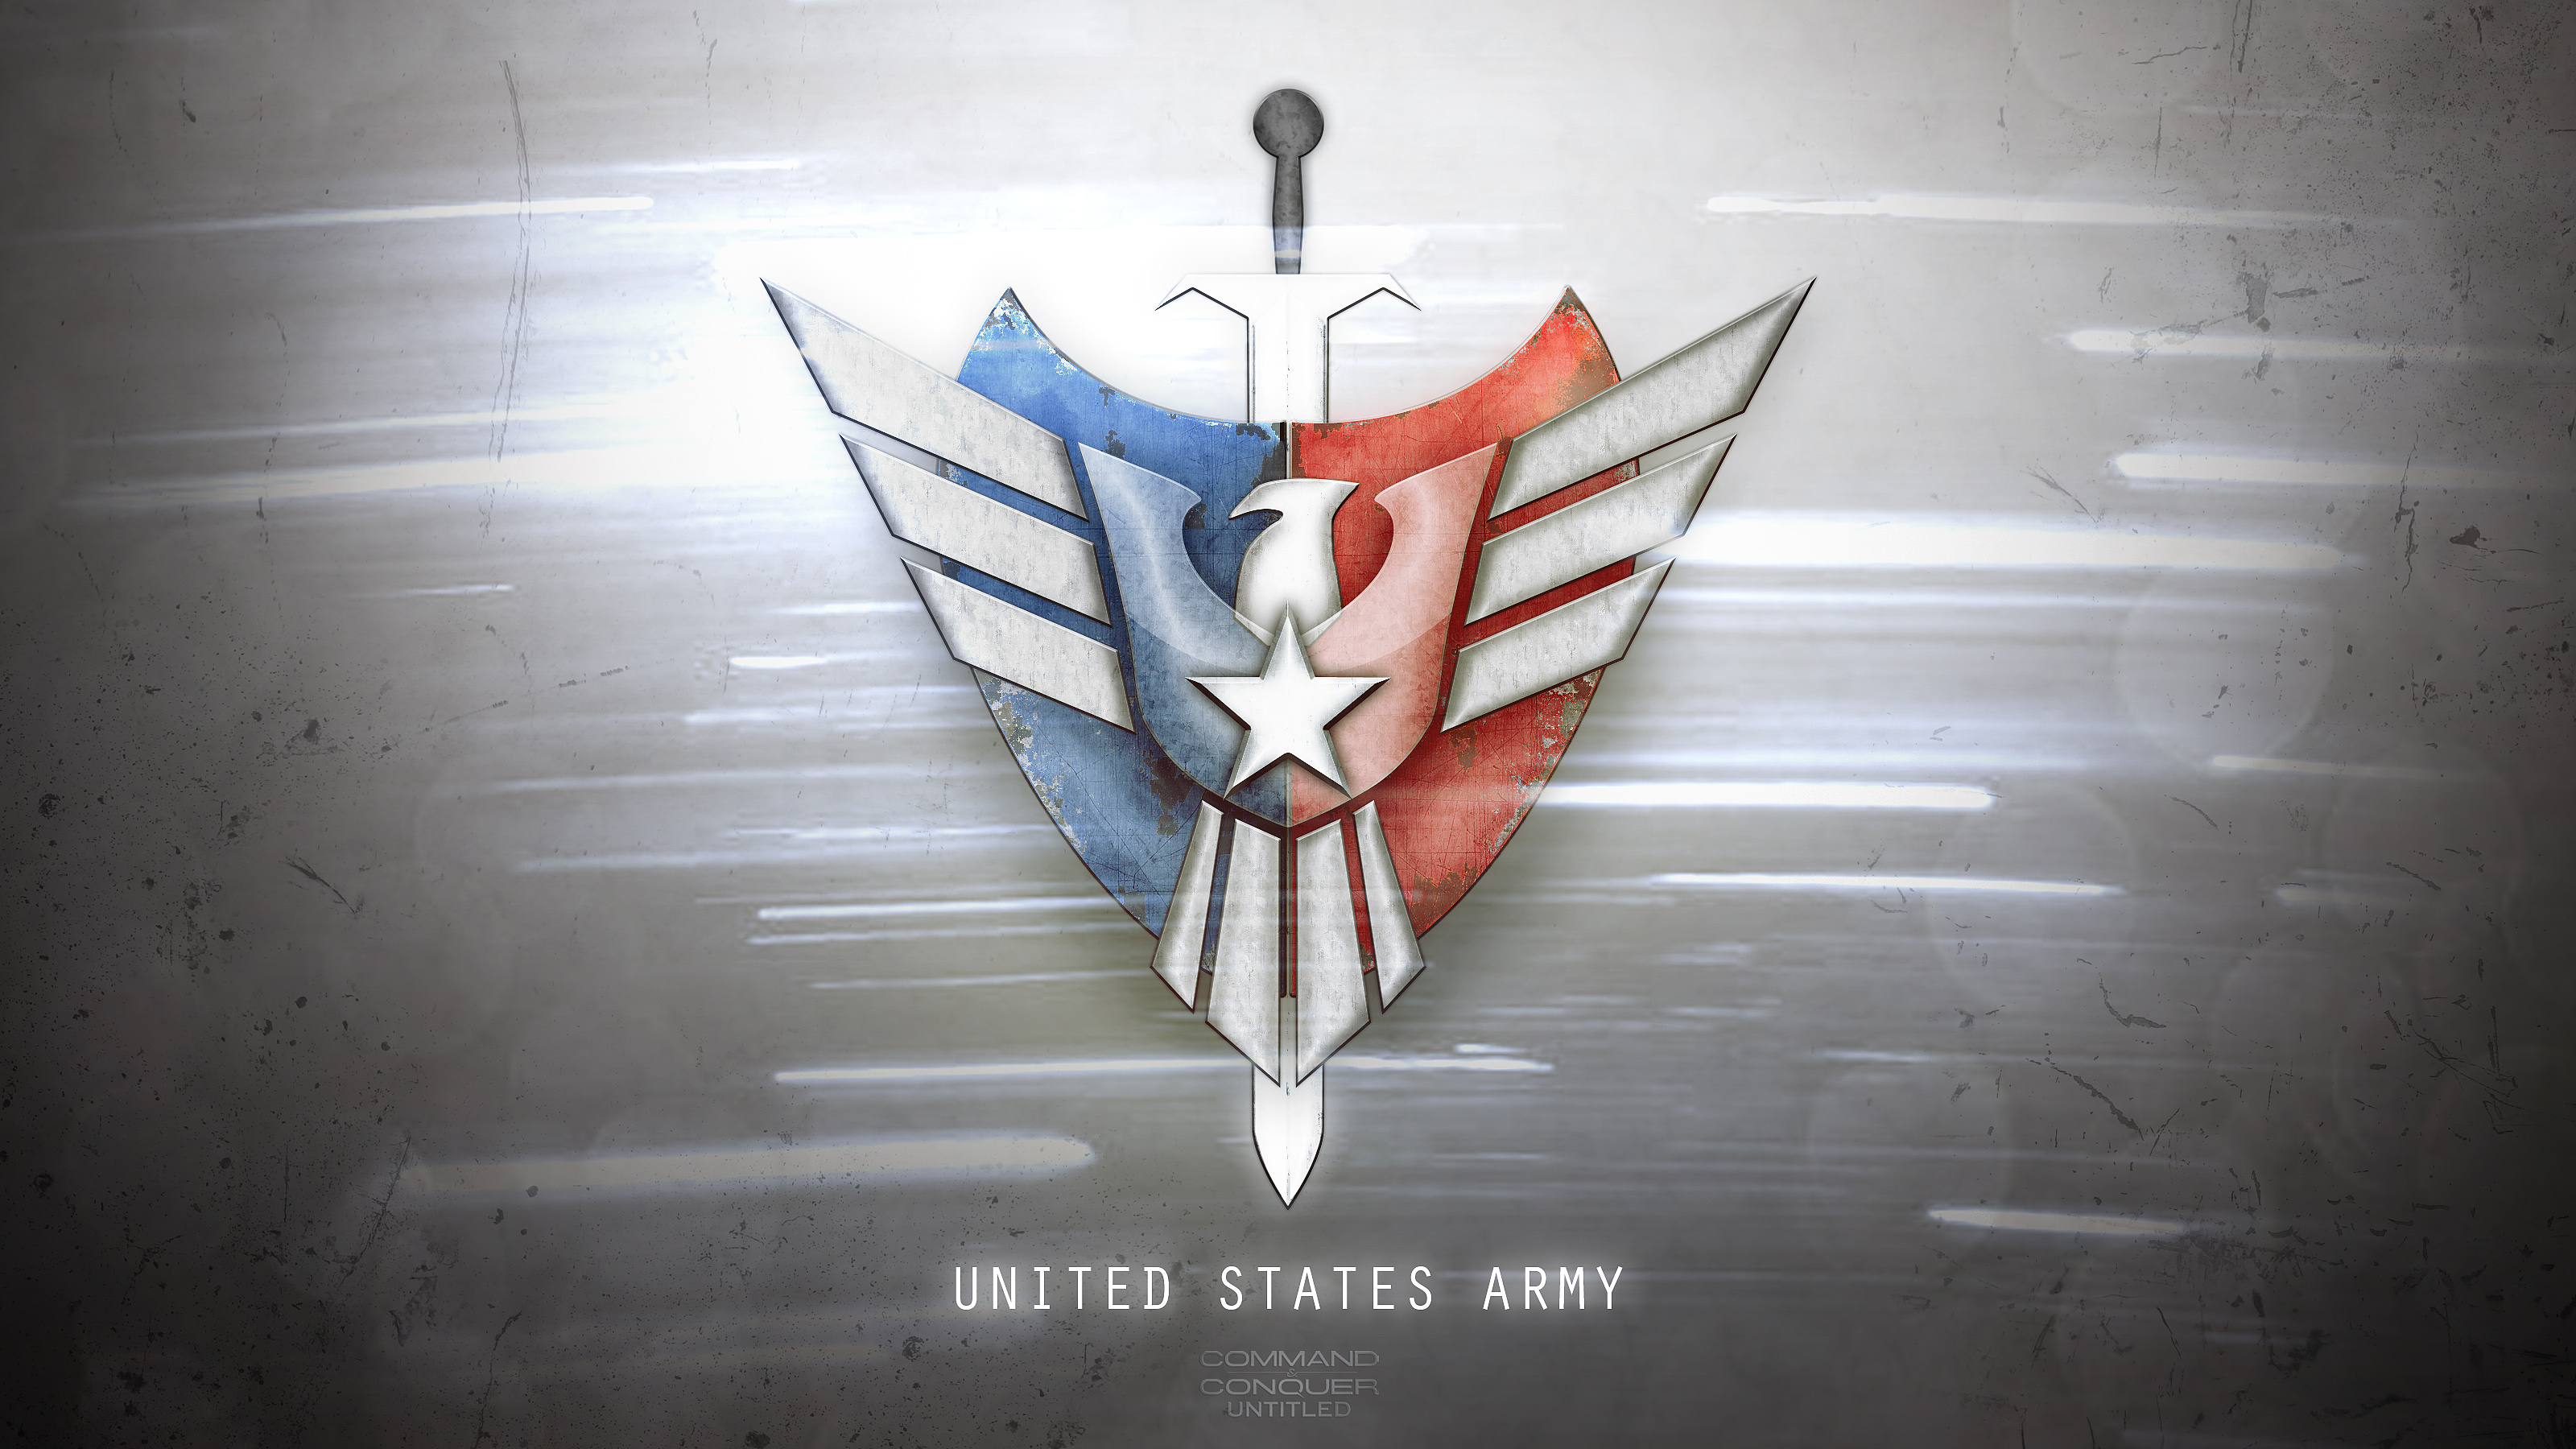 United States Army image&C: Untitled mod for C&C: Generals Zero Hour